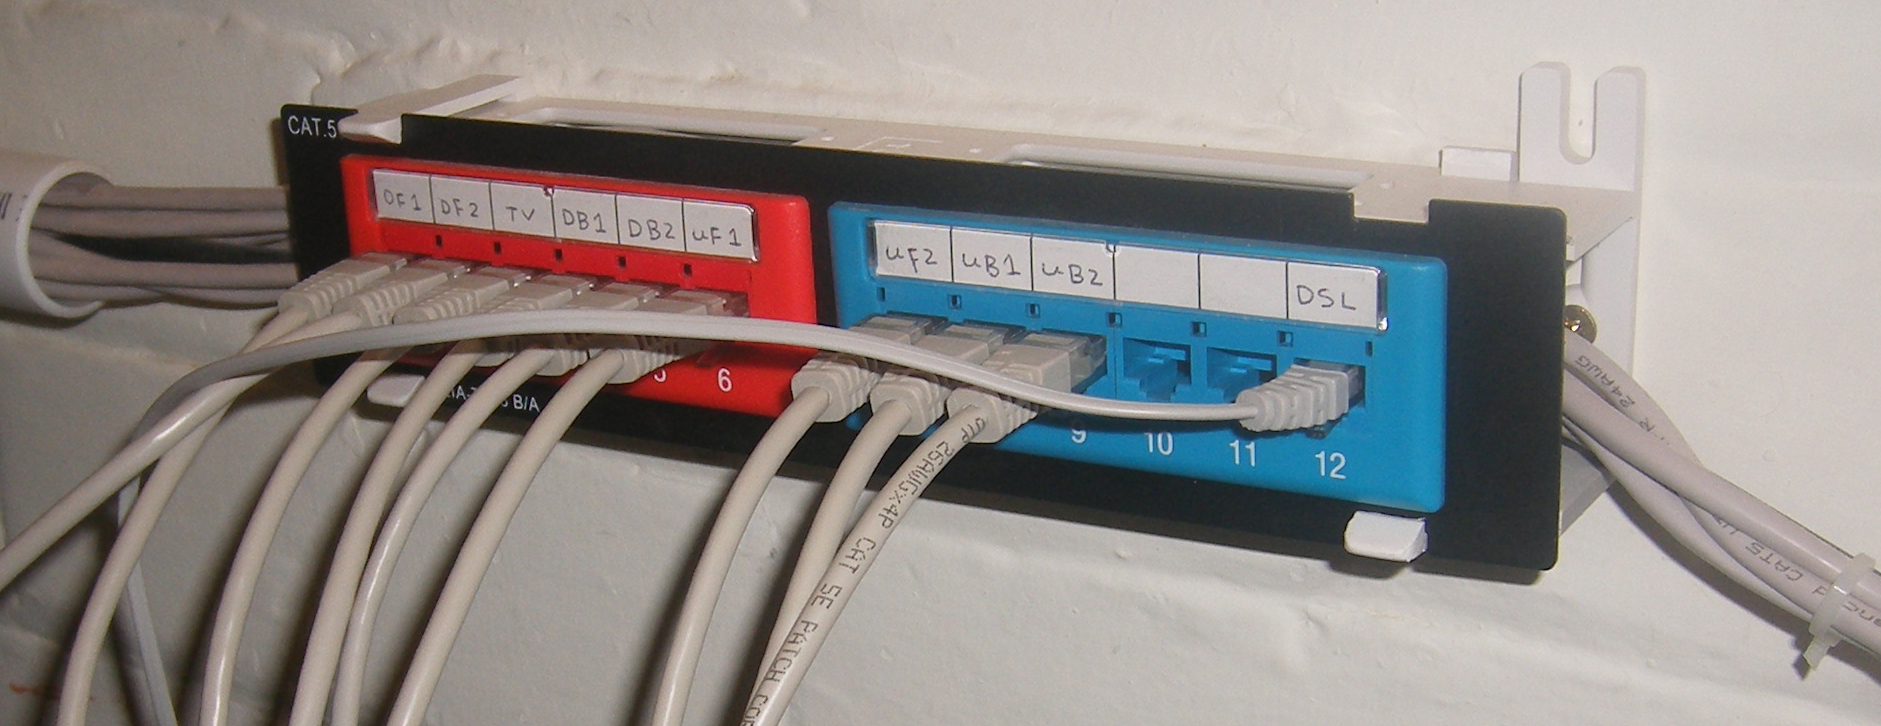 Ethernet Patch Panel Use